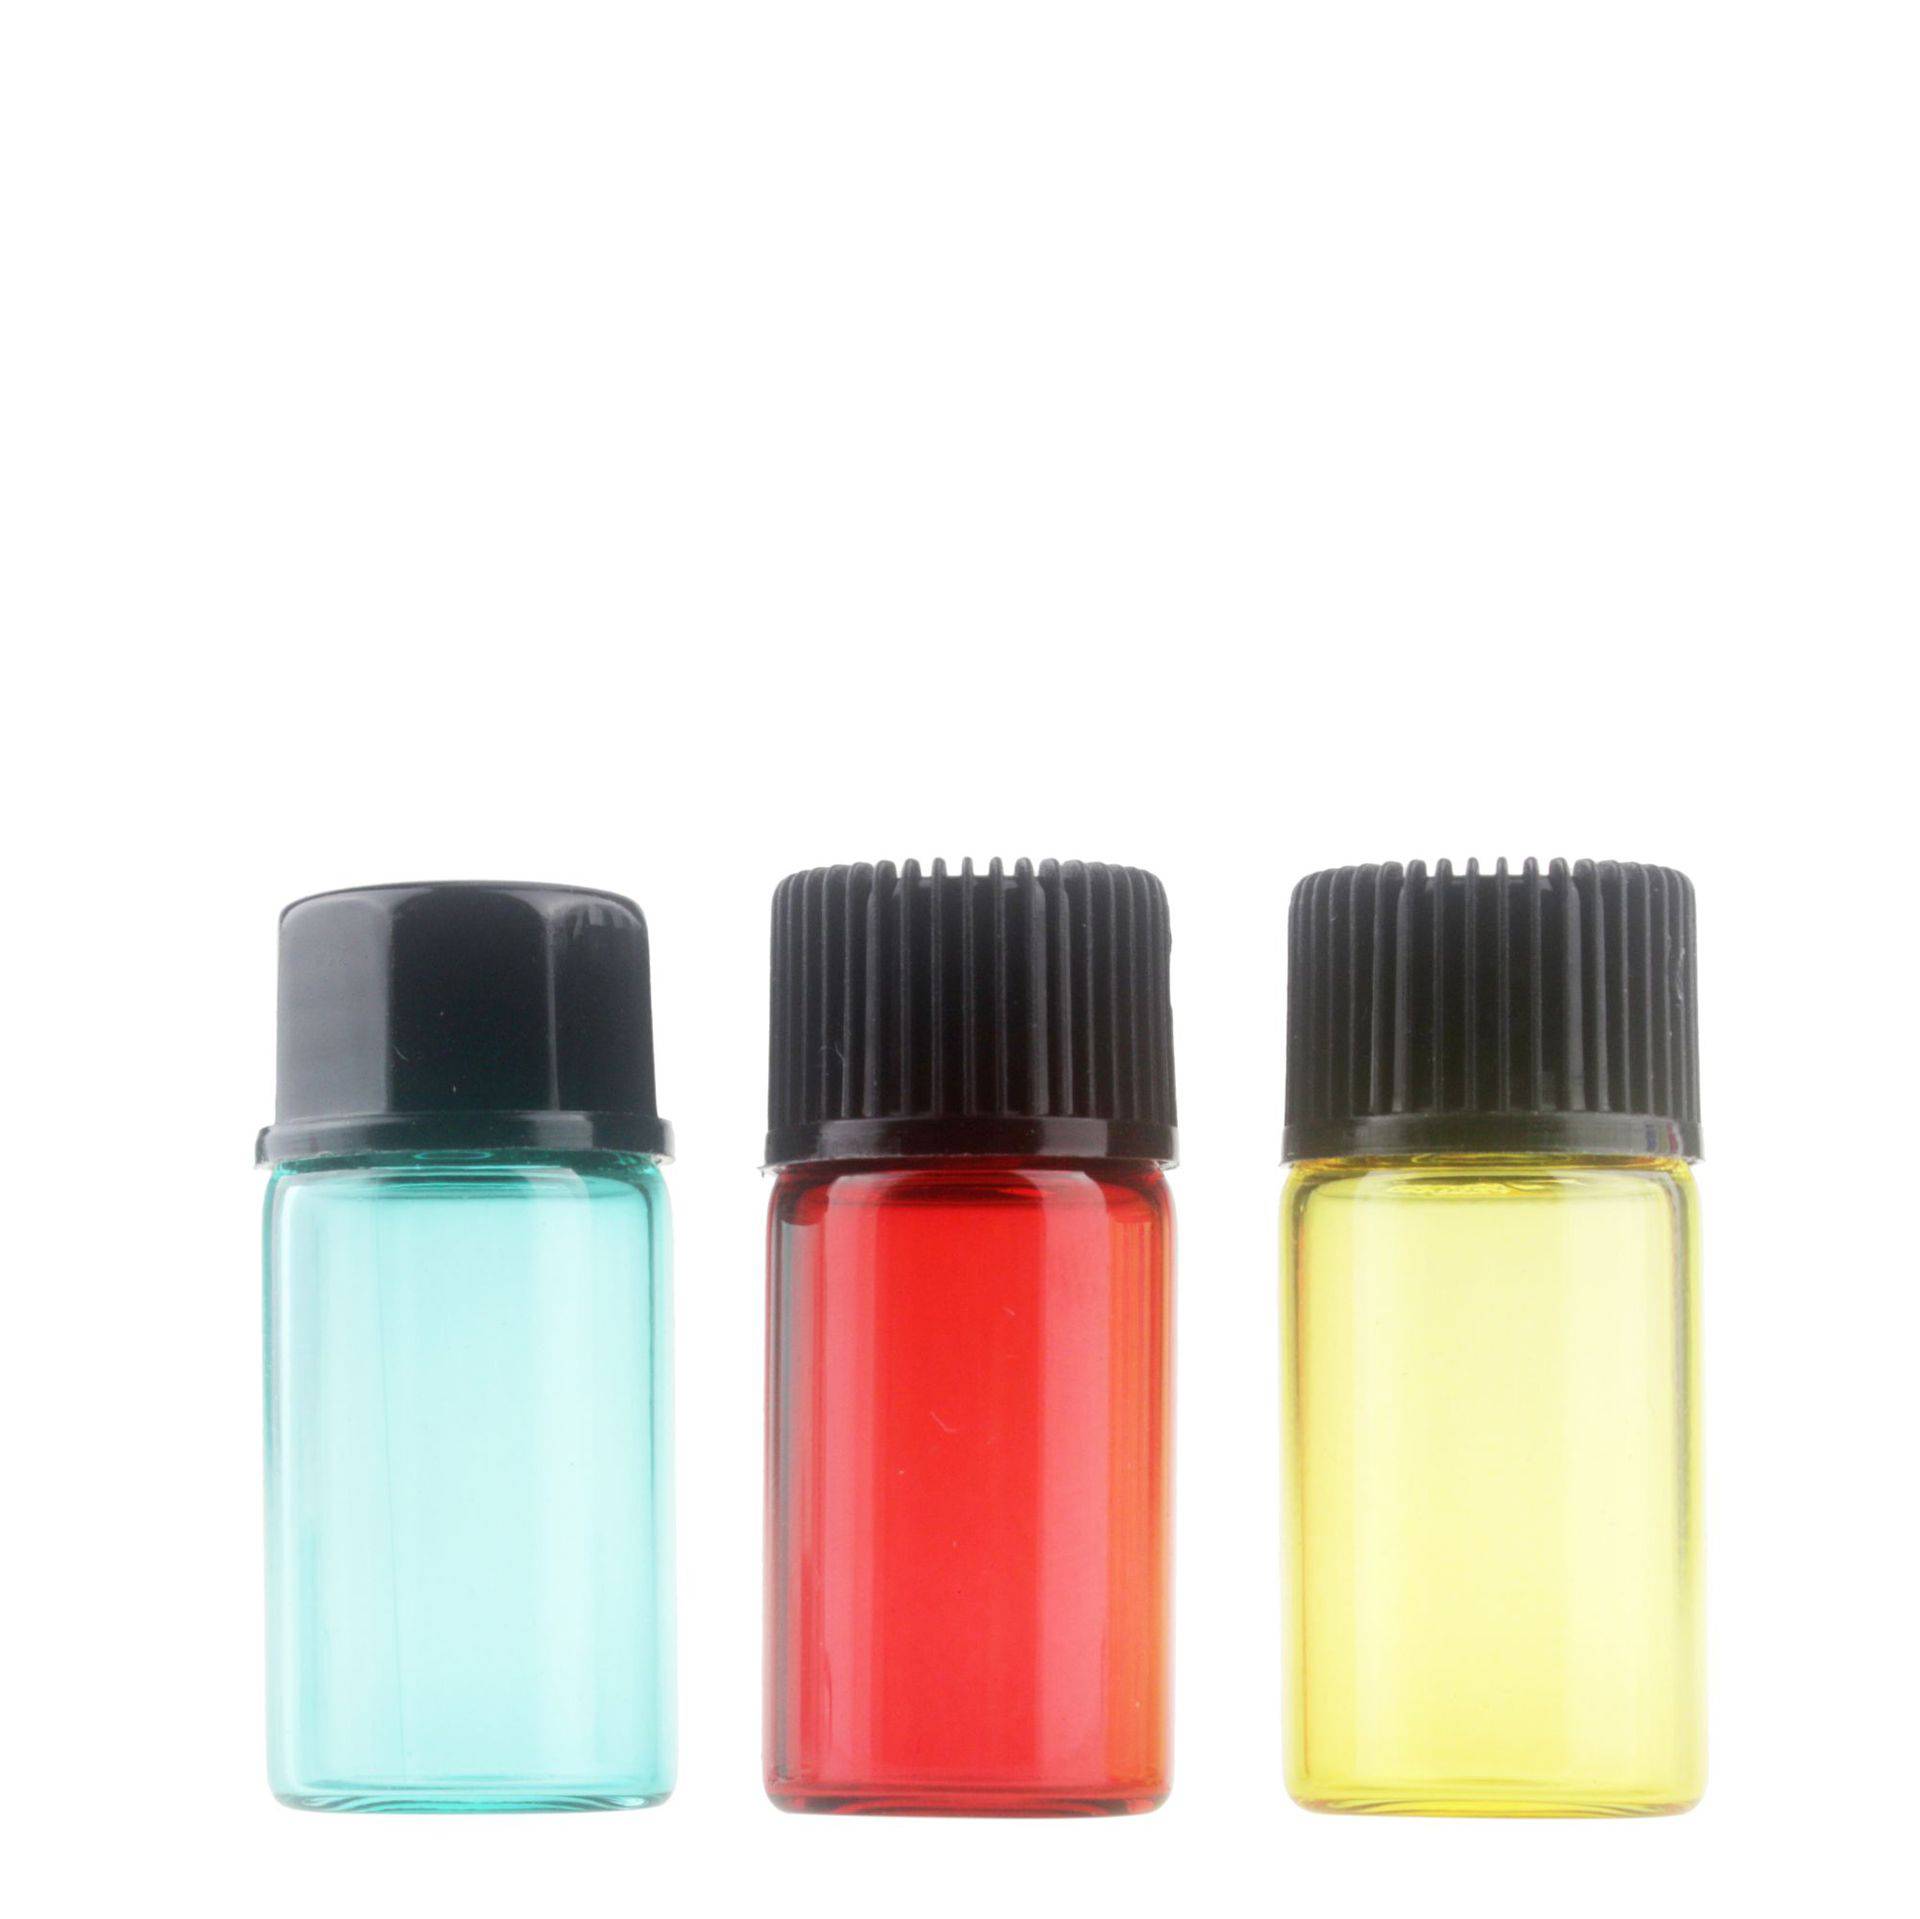 Good quality Pocket Sized Perfume Spray Bottle - 1ml 2ml 3ml small essential oil glass vials with special customized color and screw cap – Erose Glass